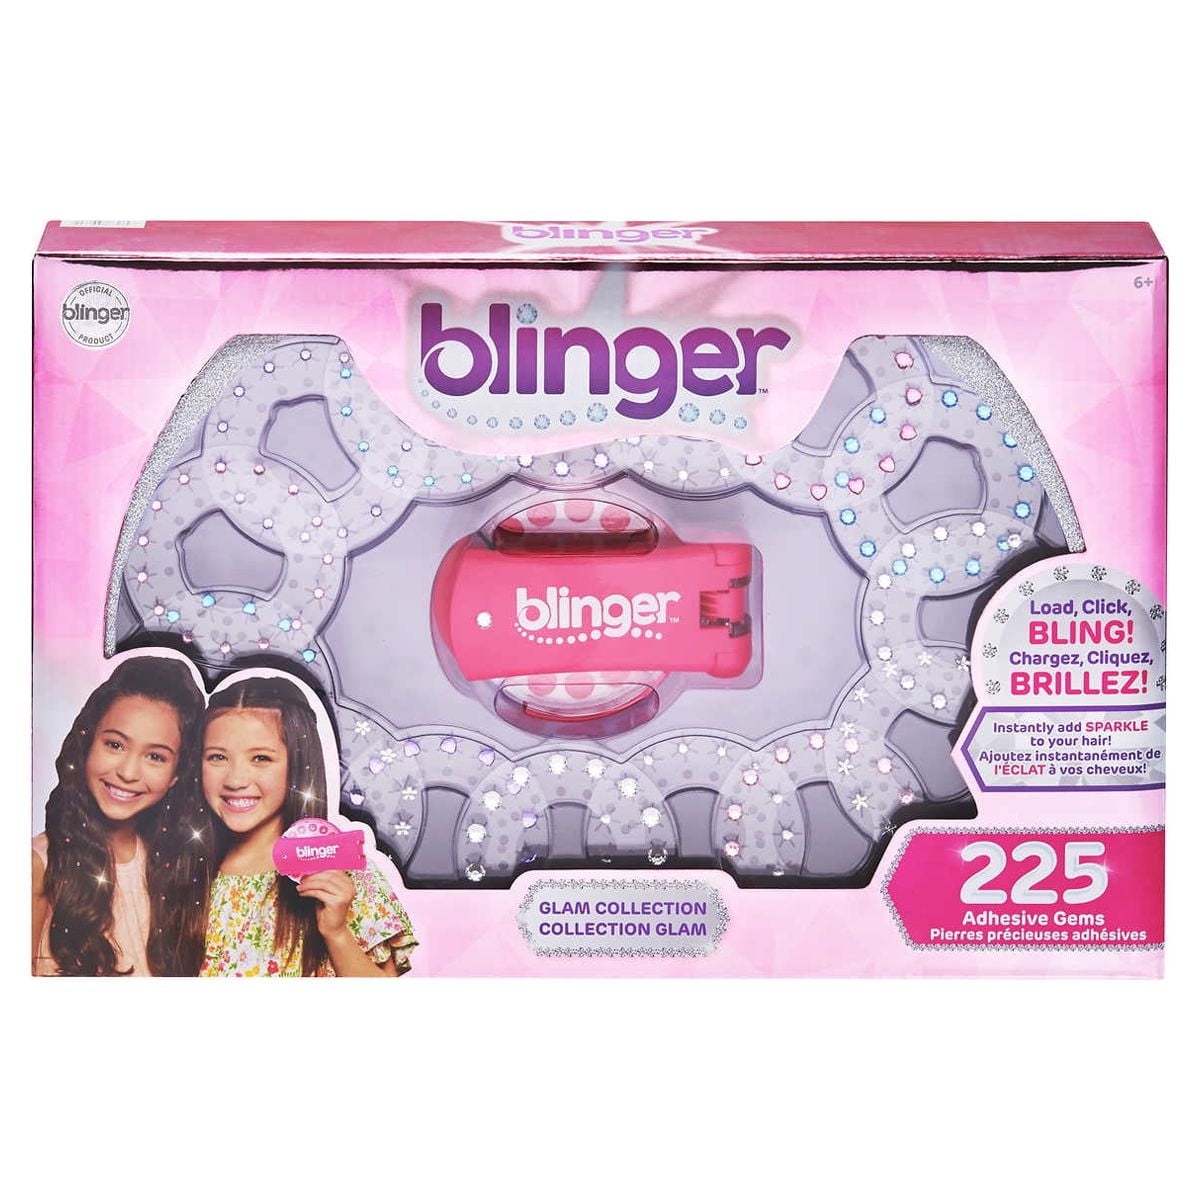 The Hair Blinger Glam Collection Set with 225 Assorted Colored Gems